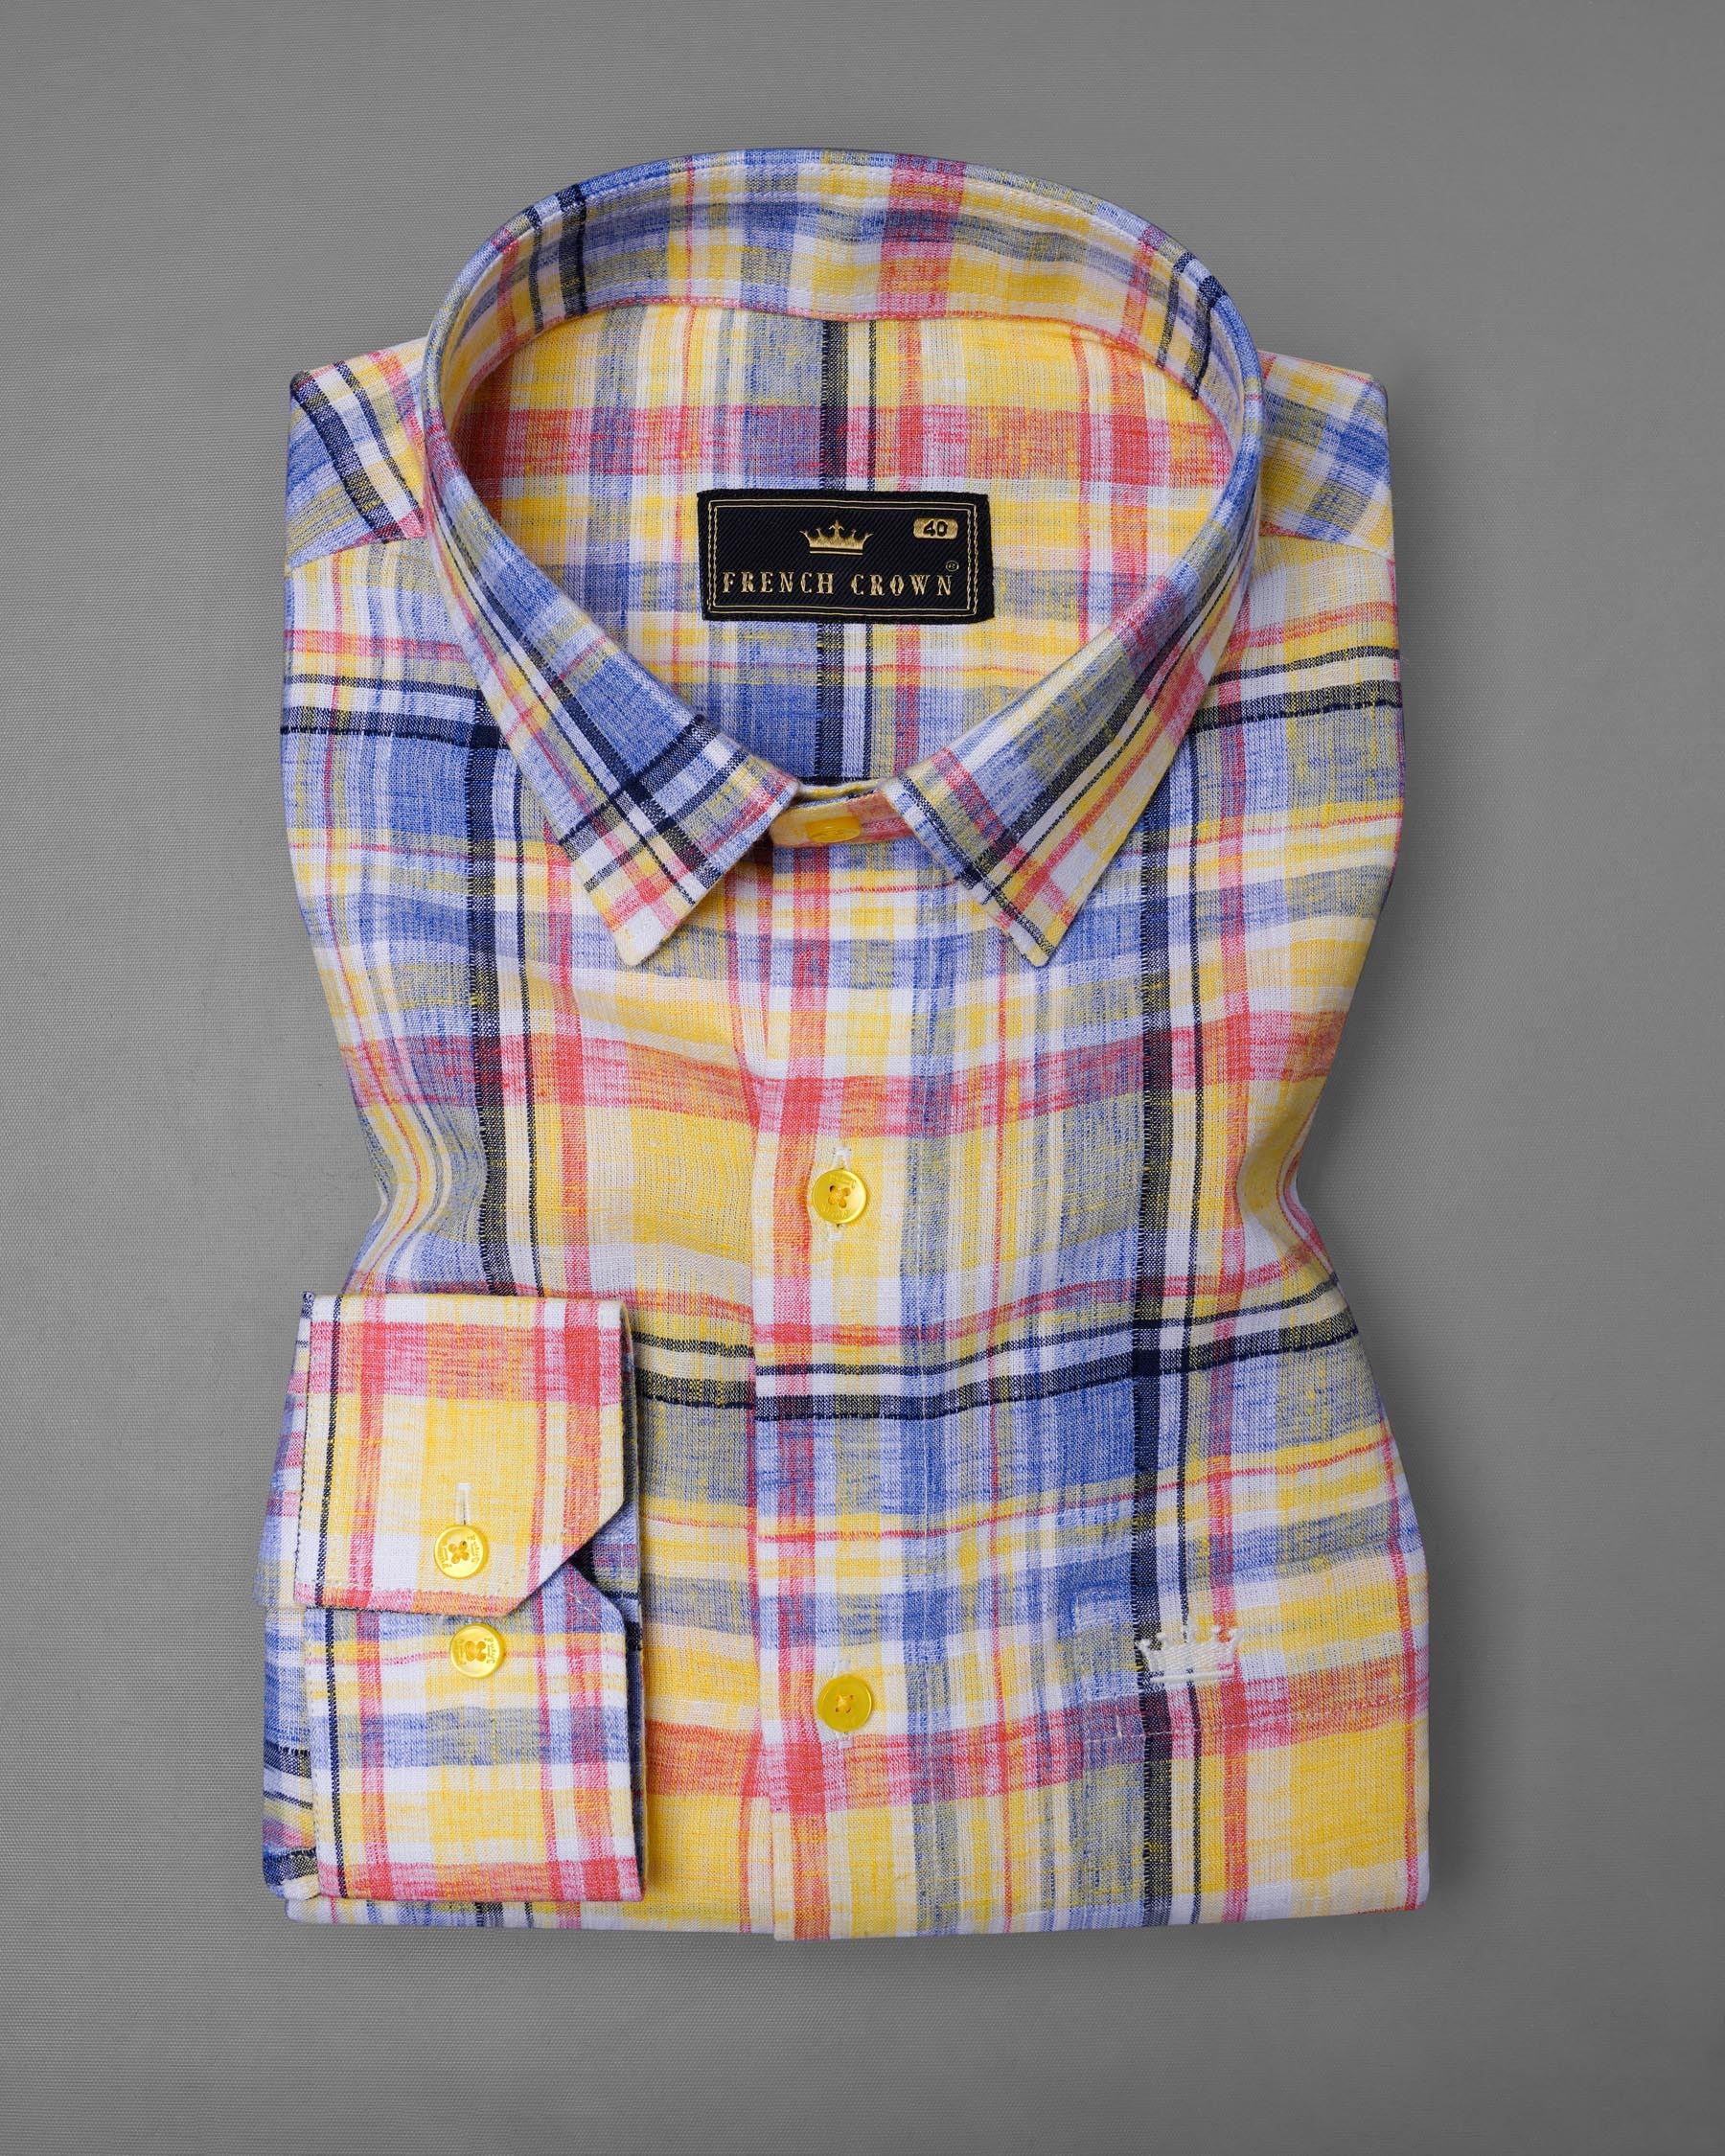 Fall Leaf Yellow and Yonder Blue Plaid Chambray Textured Premium Cotton Shirt 7844-YL-38,7844-YL-38,7844-YL-39,7844-YL-39,7844-YL-40,7844-YL-40,7844-YL-42,7844-YL-42,7844-YL-44,7844-YL-44,7844-YL-46,7844-YL-46,7844-YL-48,7844-YL-48,7844-YL-50,7844-YL-50,7844-YL-52,7844-YL-52